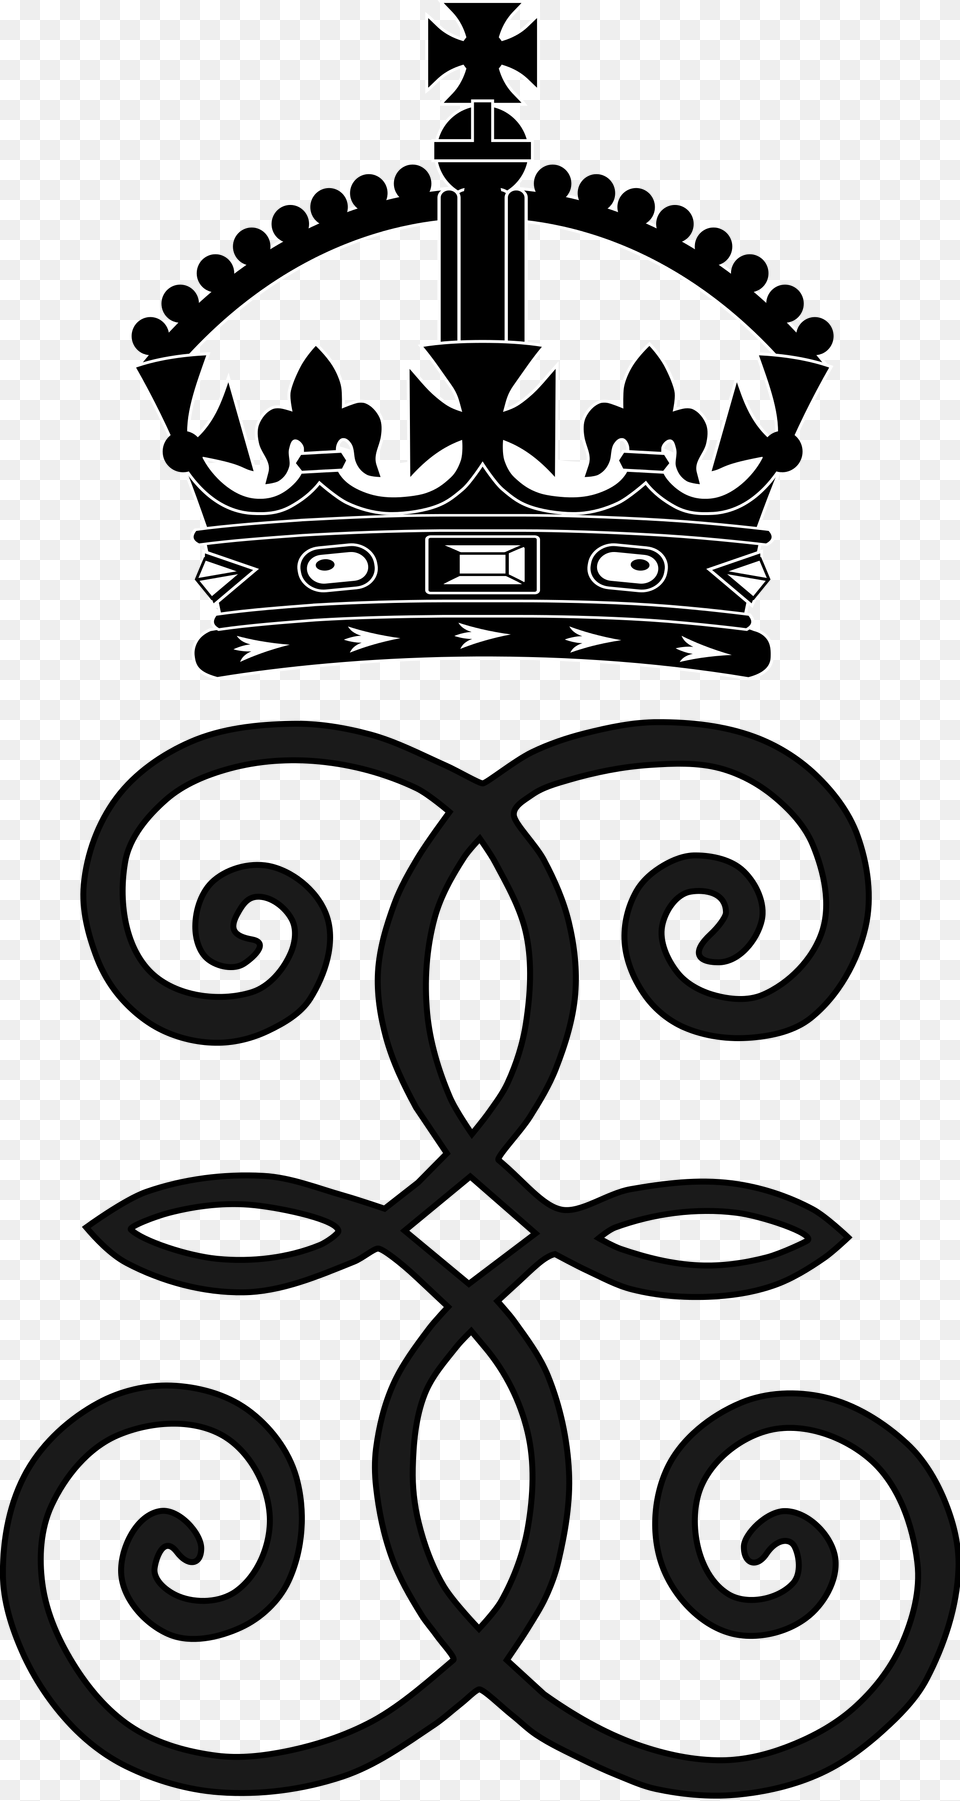 Intertwined Letter Es Below A Tudor Crown, Accessories, Jewelry Free Transparent Png